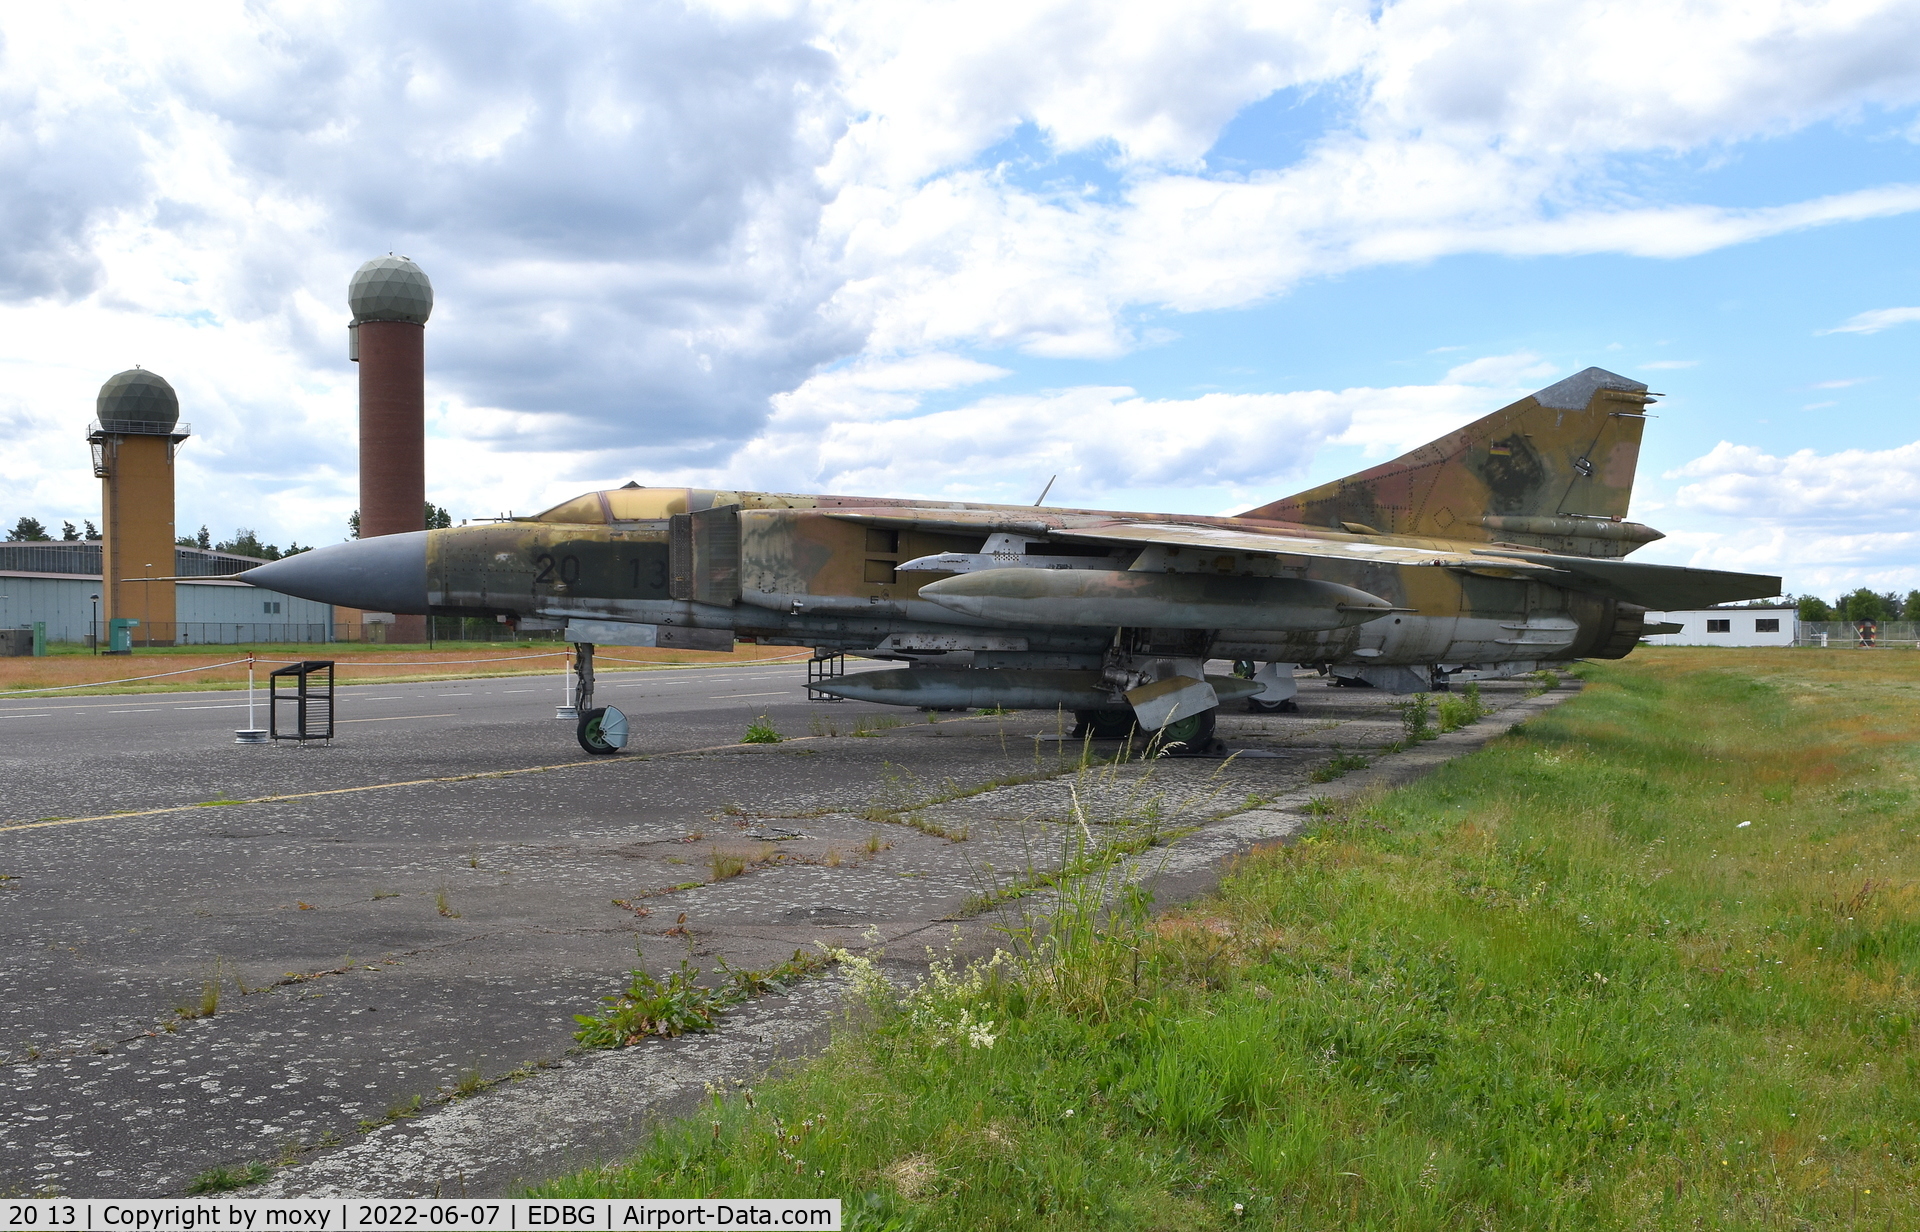 20 13, Mikoyan-Gurevich MiG-23ML C/N 0390324624, Mikoyan-Gurevich MiG-23ML Flogger at the  Bundeswehr Museum of Military History – Berlin-Gatow Airfield.